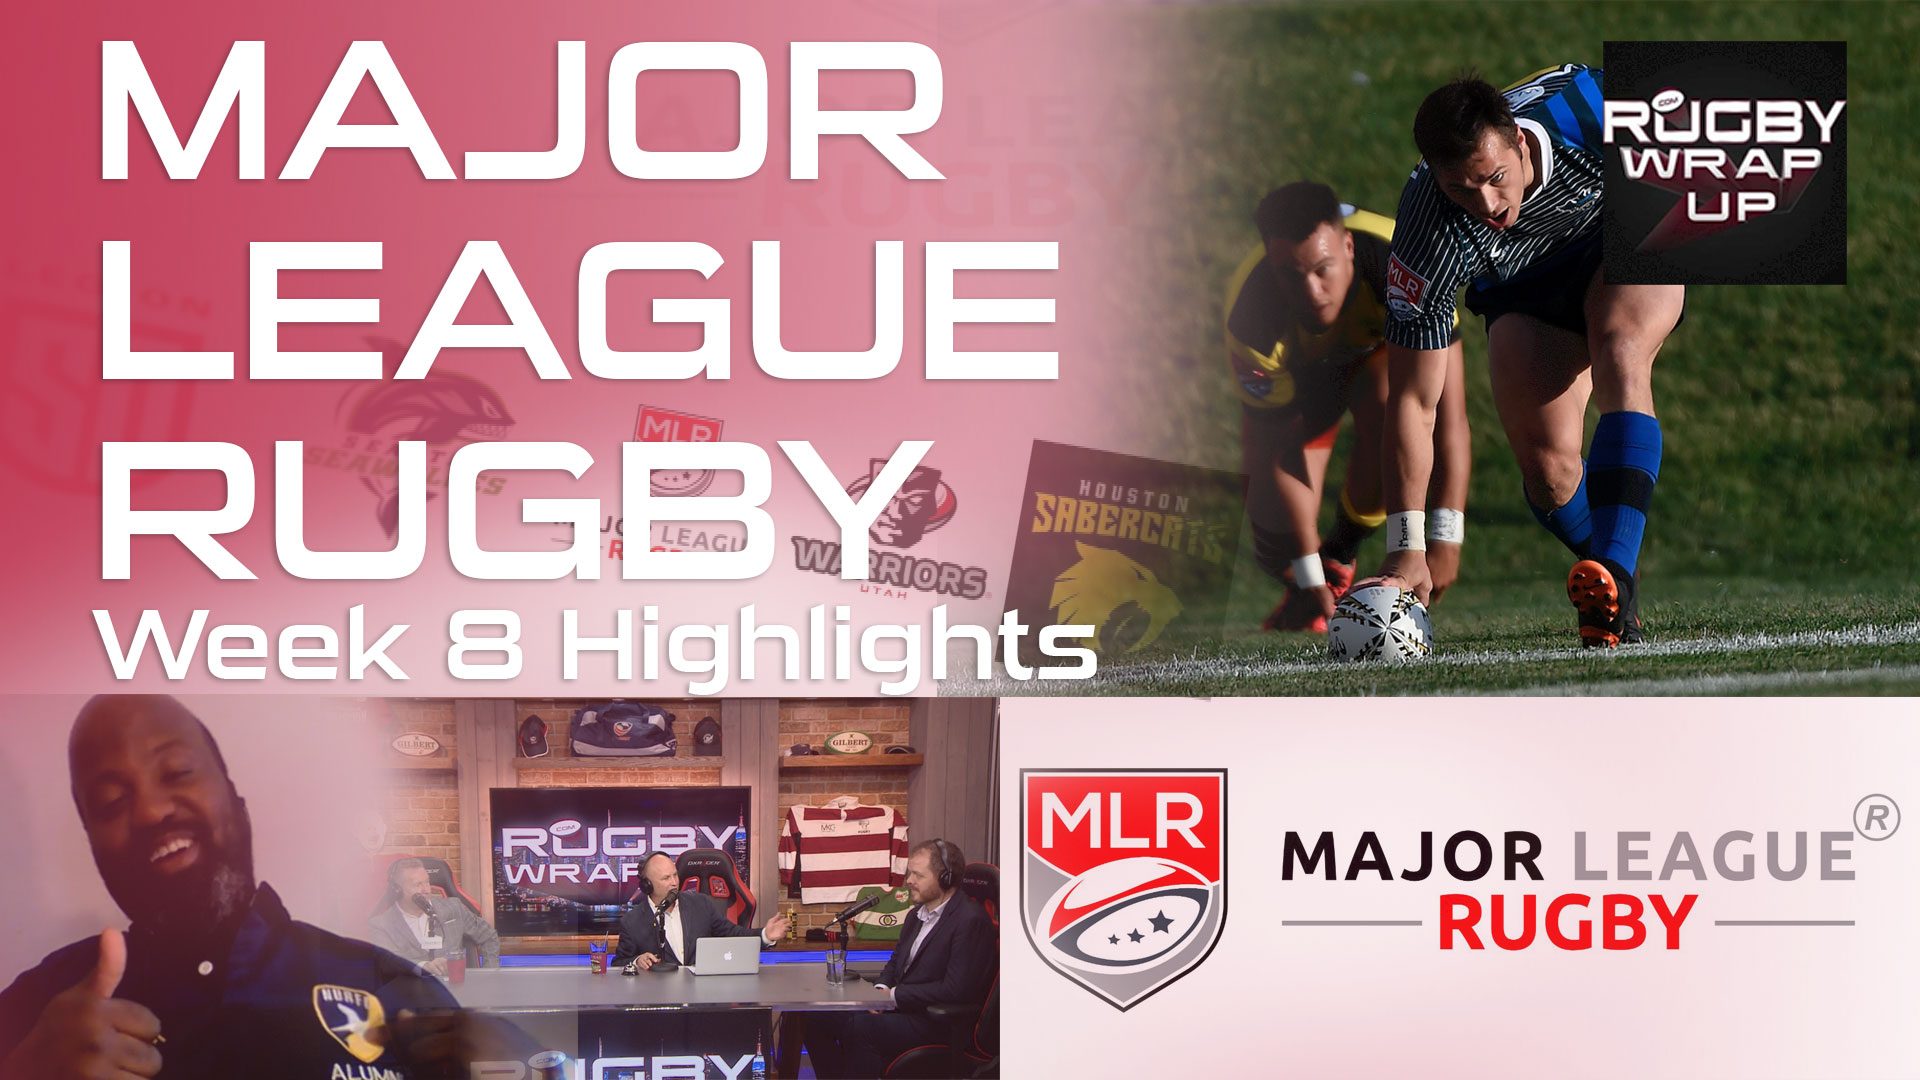 Rugby TV and Podcast: Major League Rugby Banter/Predictions/Highlights by Lewis, Pengelly, Blaber, McCarthy #MLR, Rugby_Wrap_Up